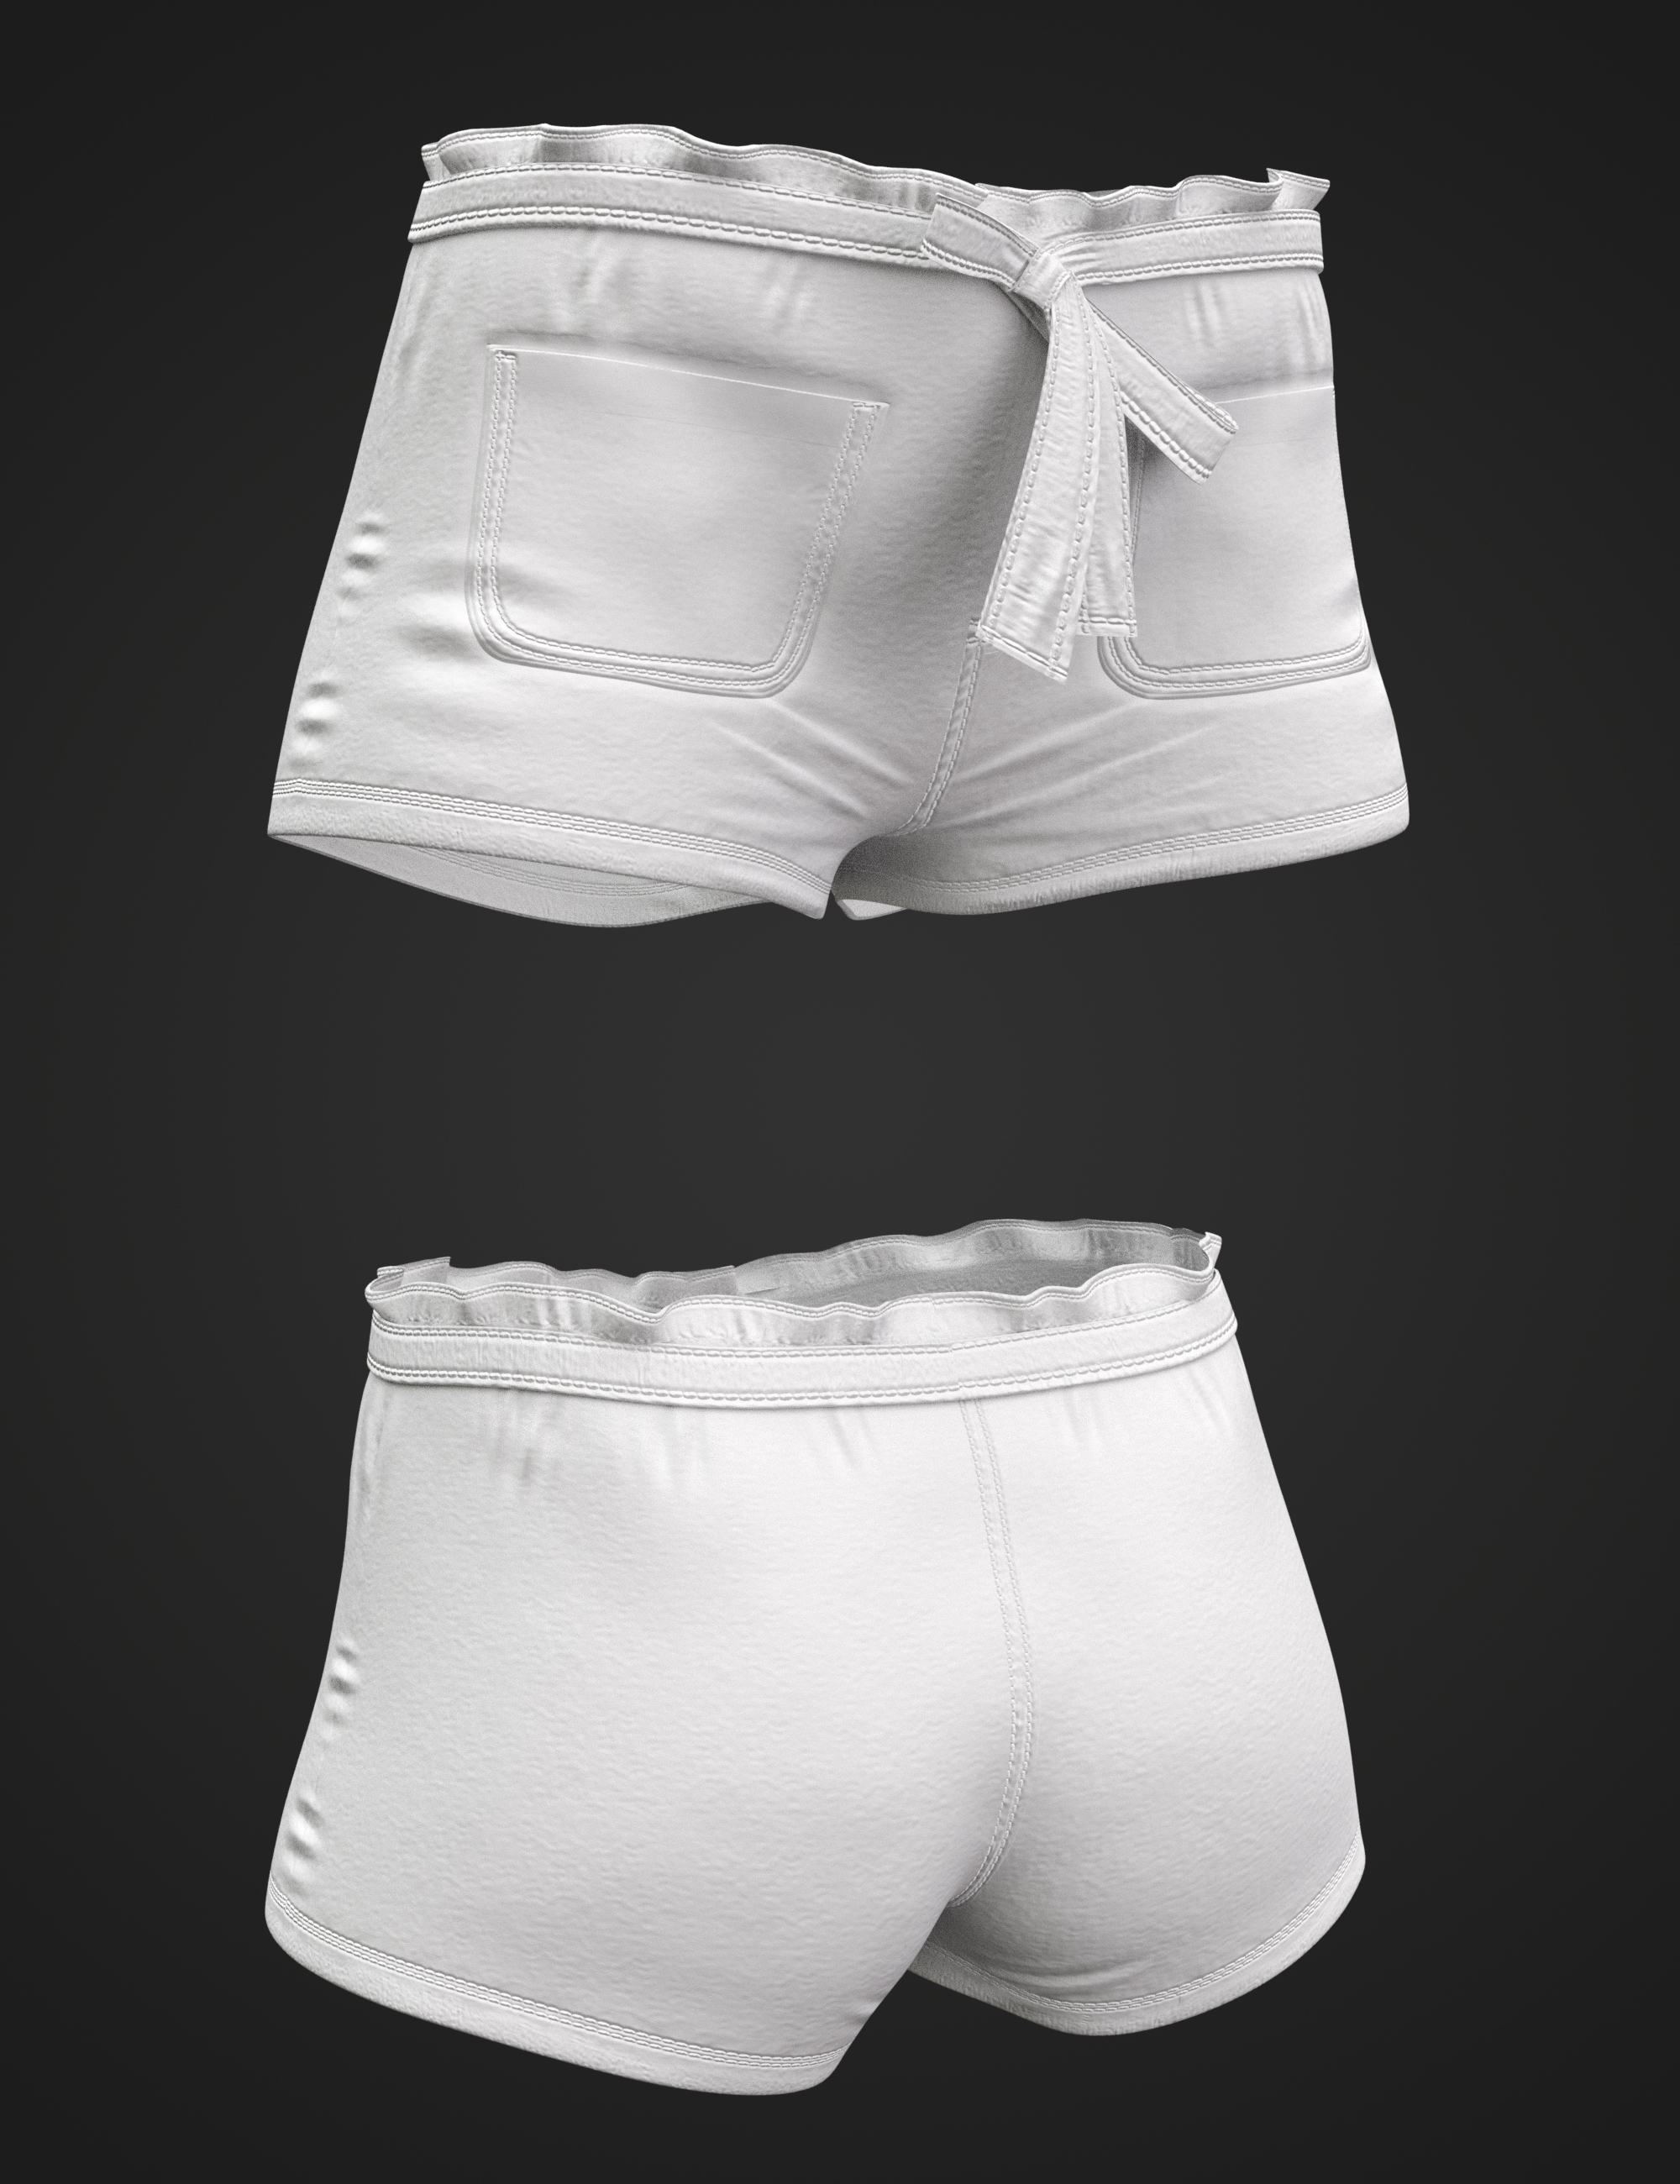 X Fashion Soft and Casual Shorts for Genesis 8 and 8.1 Females